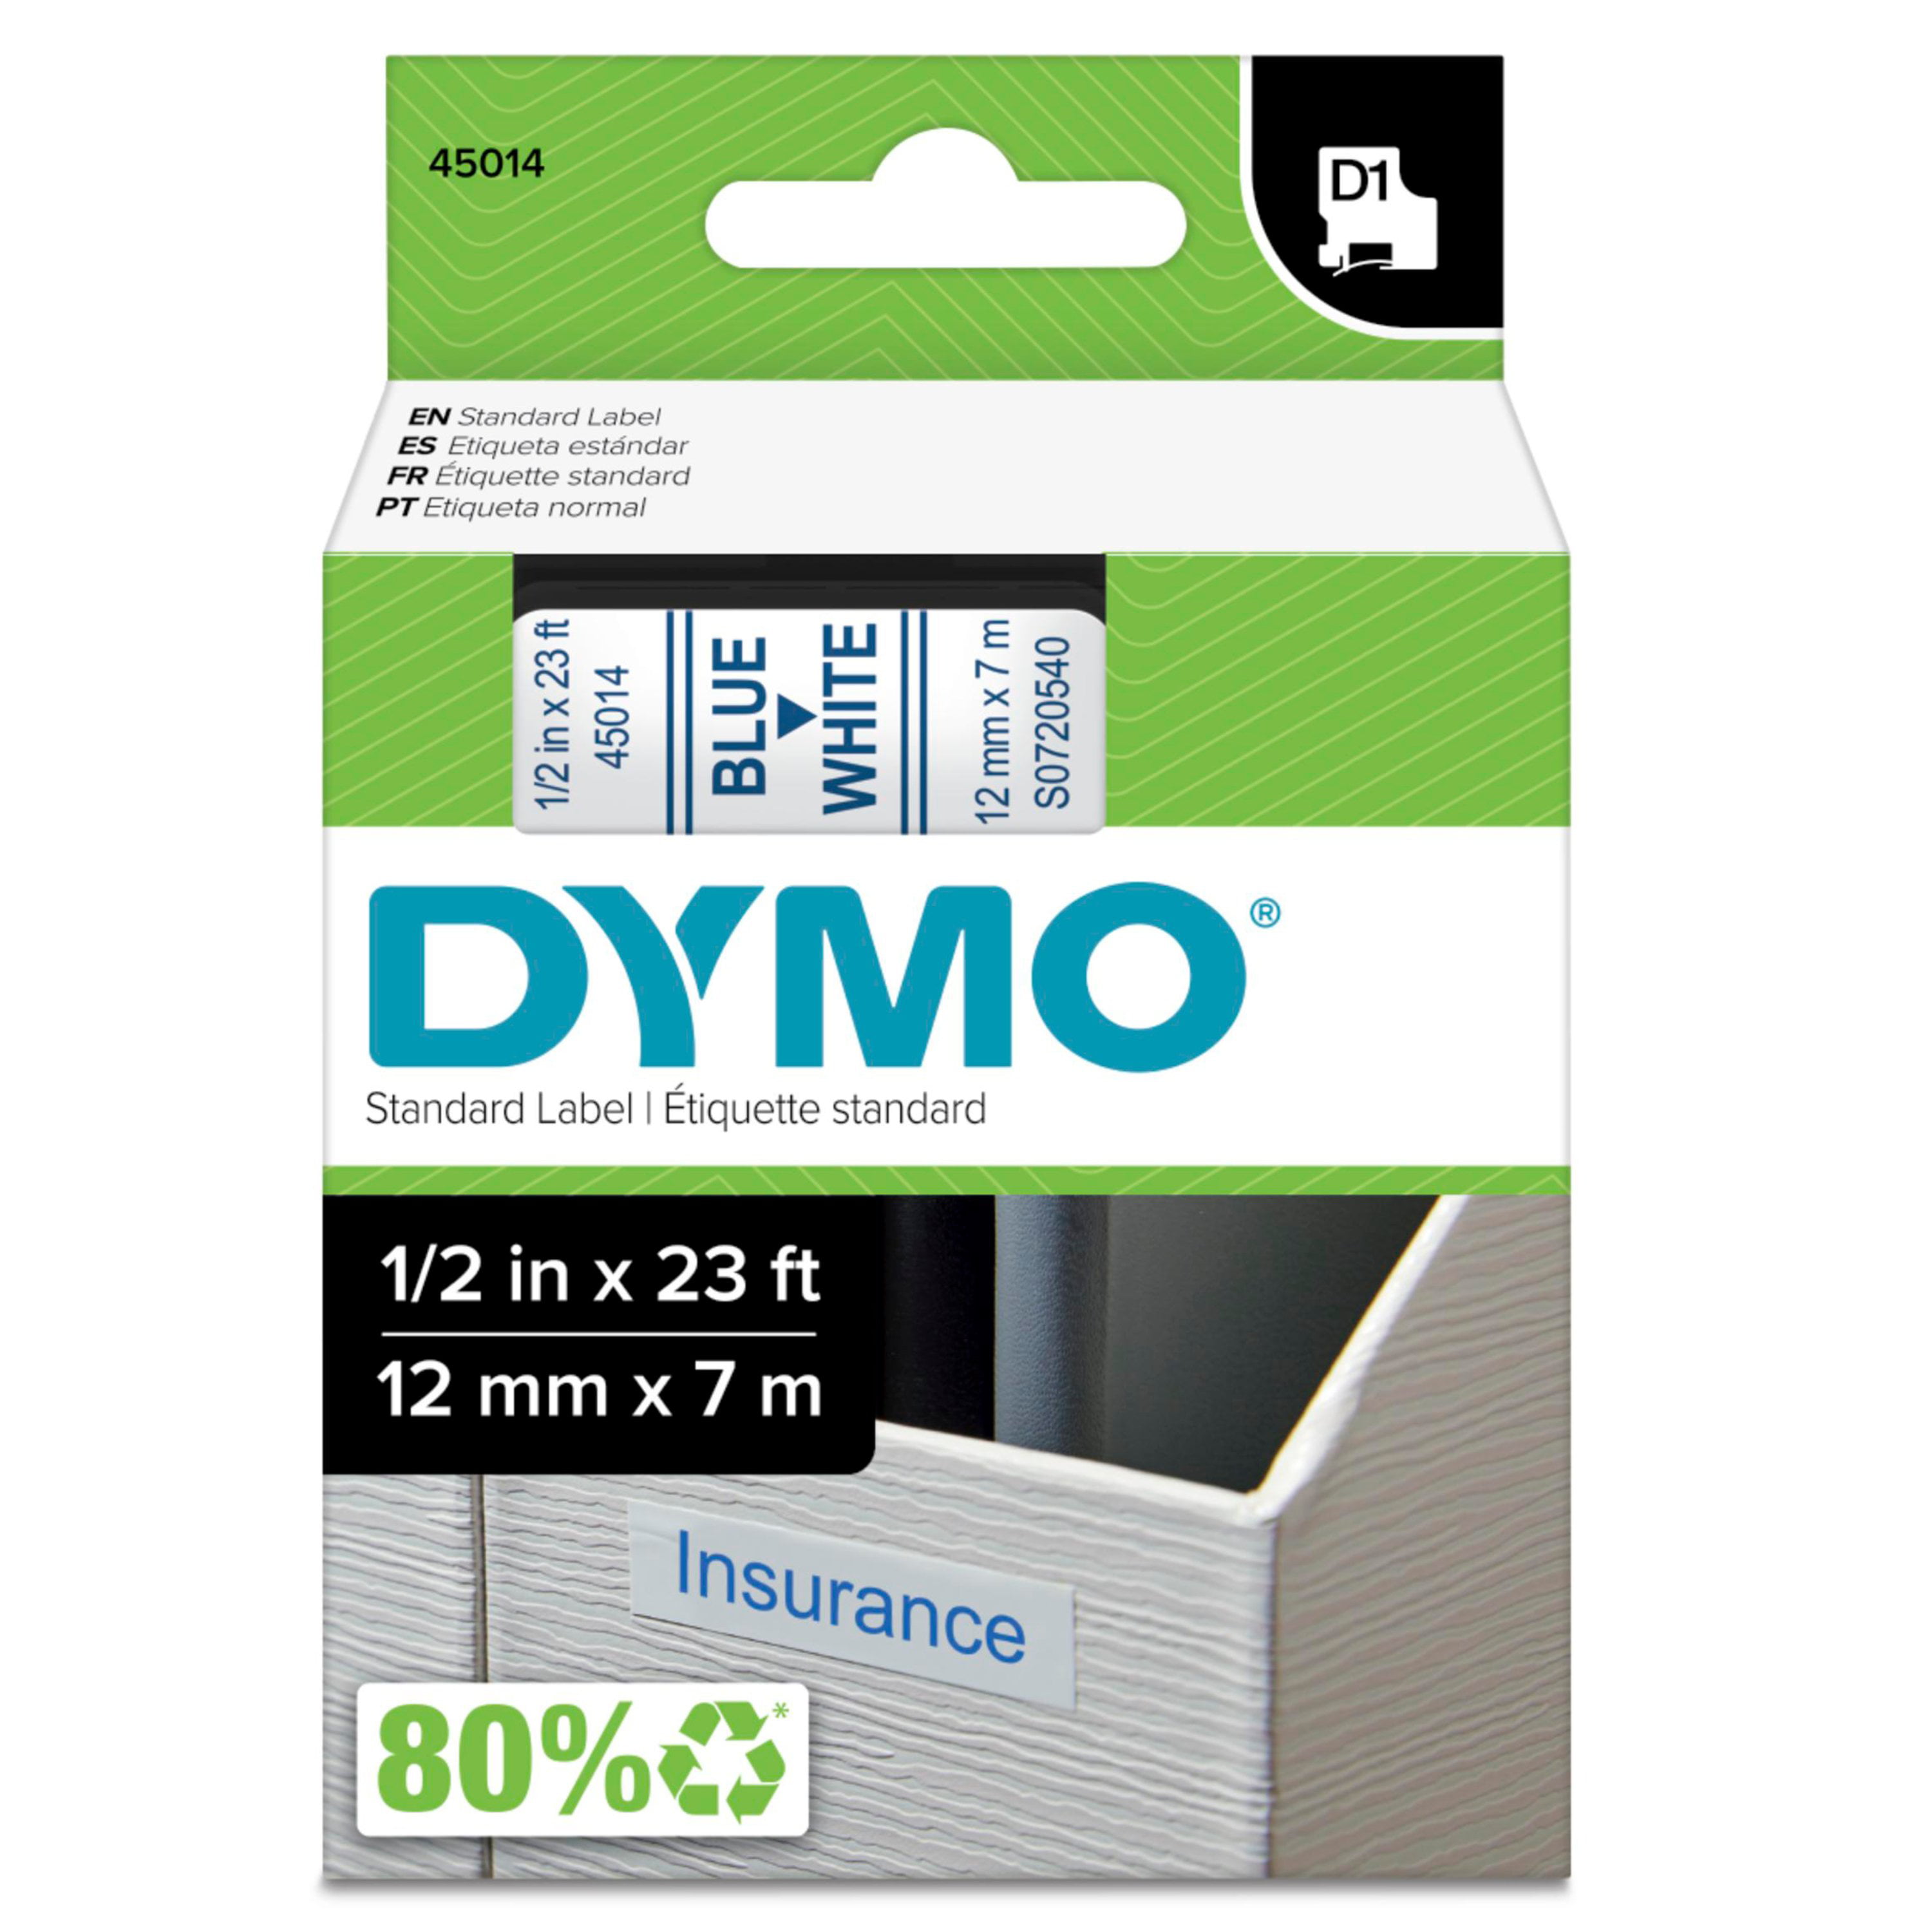 Aluminum -:- Sold as 2 Packs of Total of 2 Each / 1/2x12 Size 1 Dymo Corporation : Aluminum Tape with Adhesive